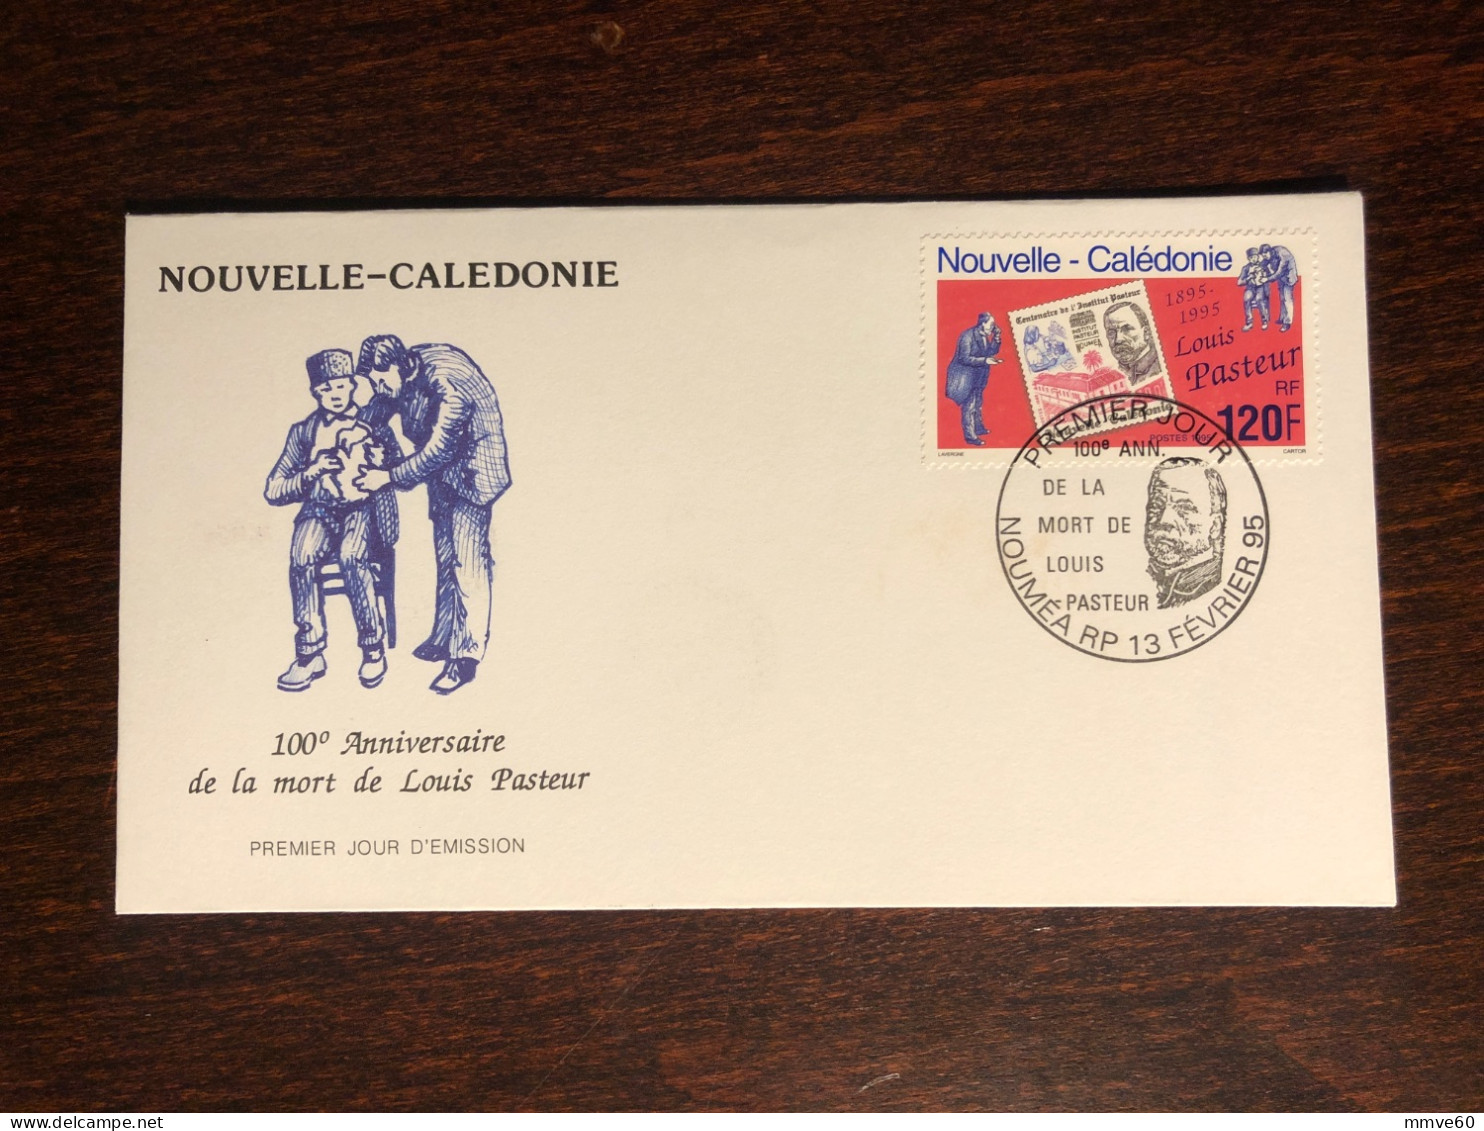 NEW CALEDONIA NOUVELLE CALEDONIE FDC COVER 1995 YEAR PASTEUR HEALTH MEDICINE - Lettres & Documents